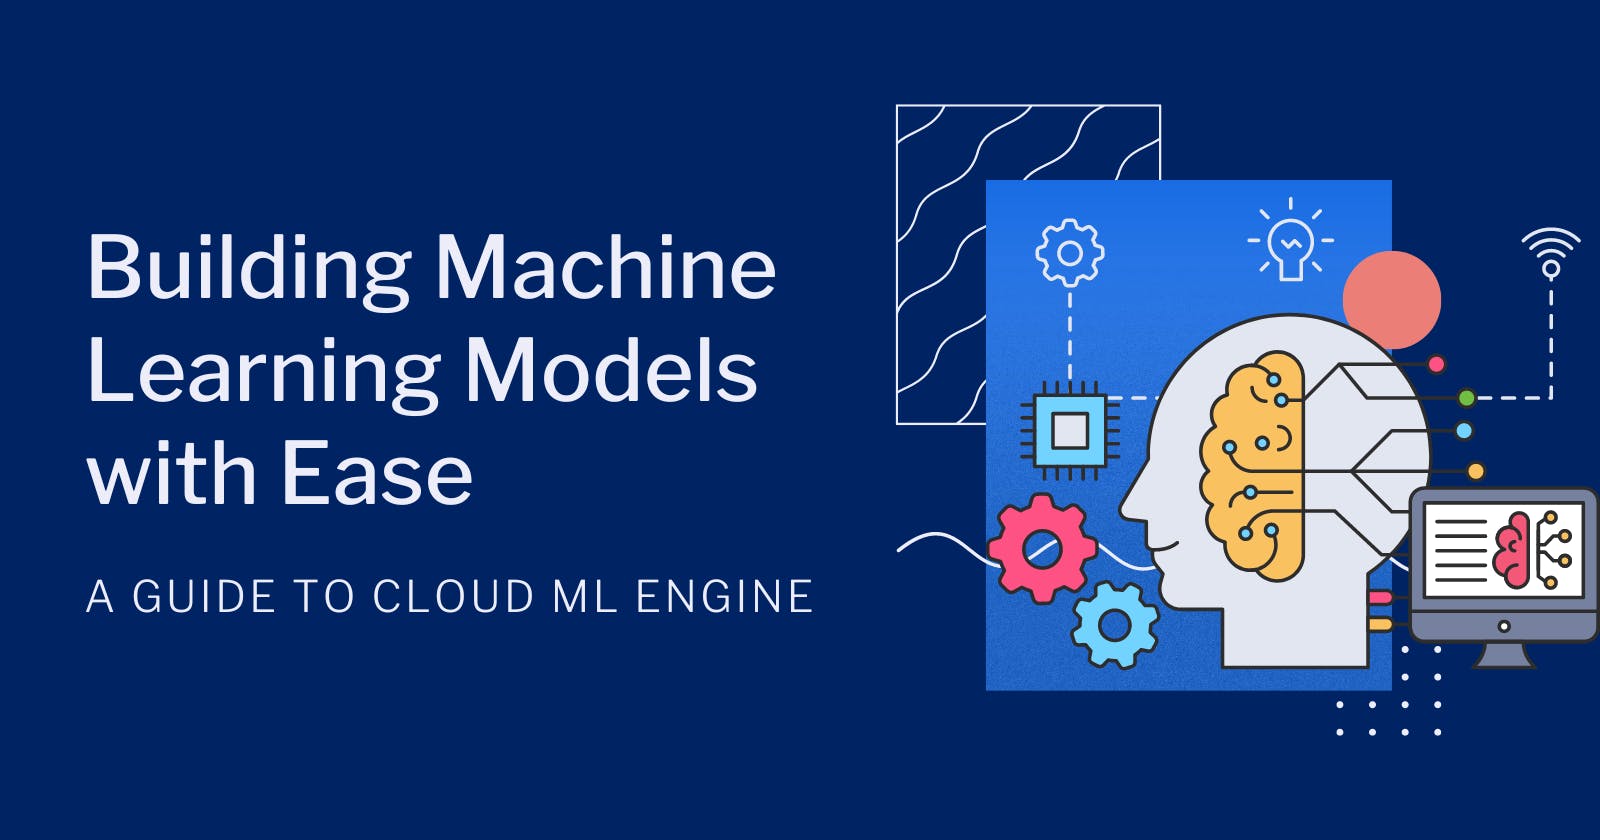 Building Machine Learning Models with Ease